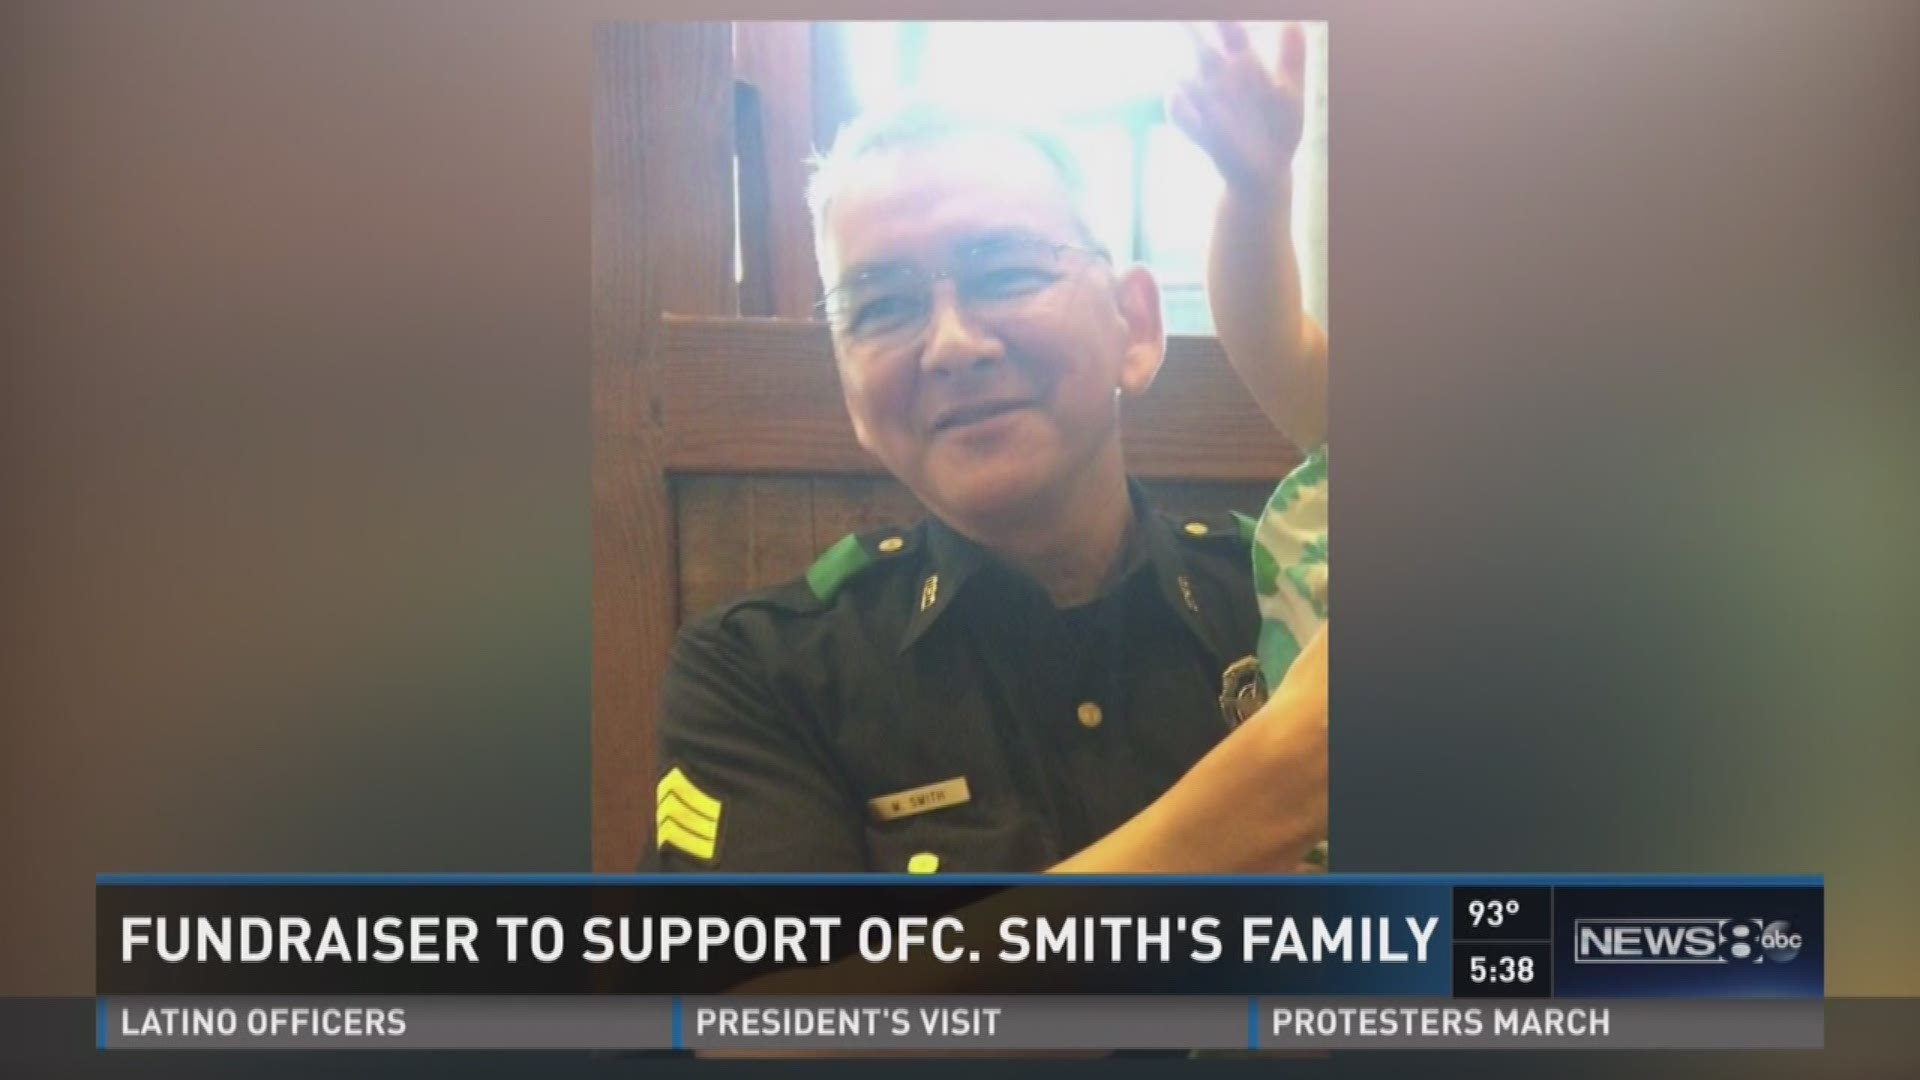 All proceeds are going to Officer Smith's family.